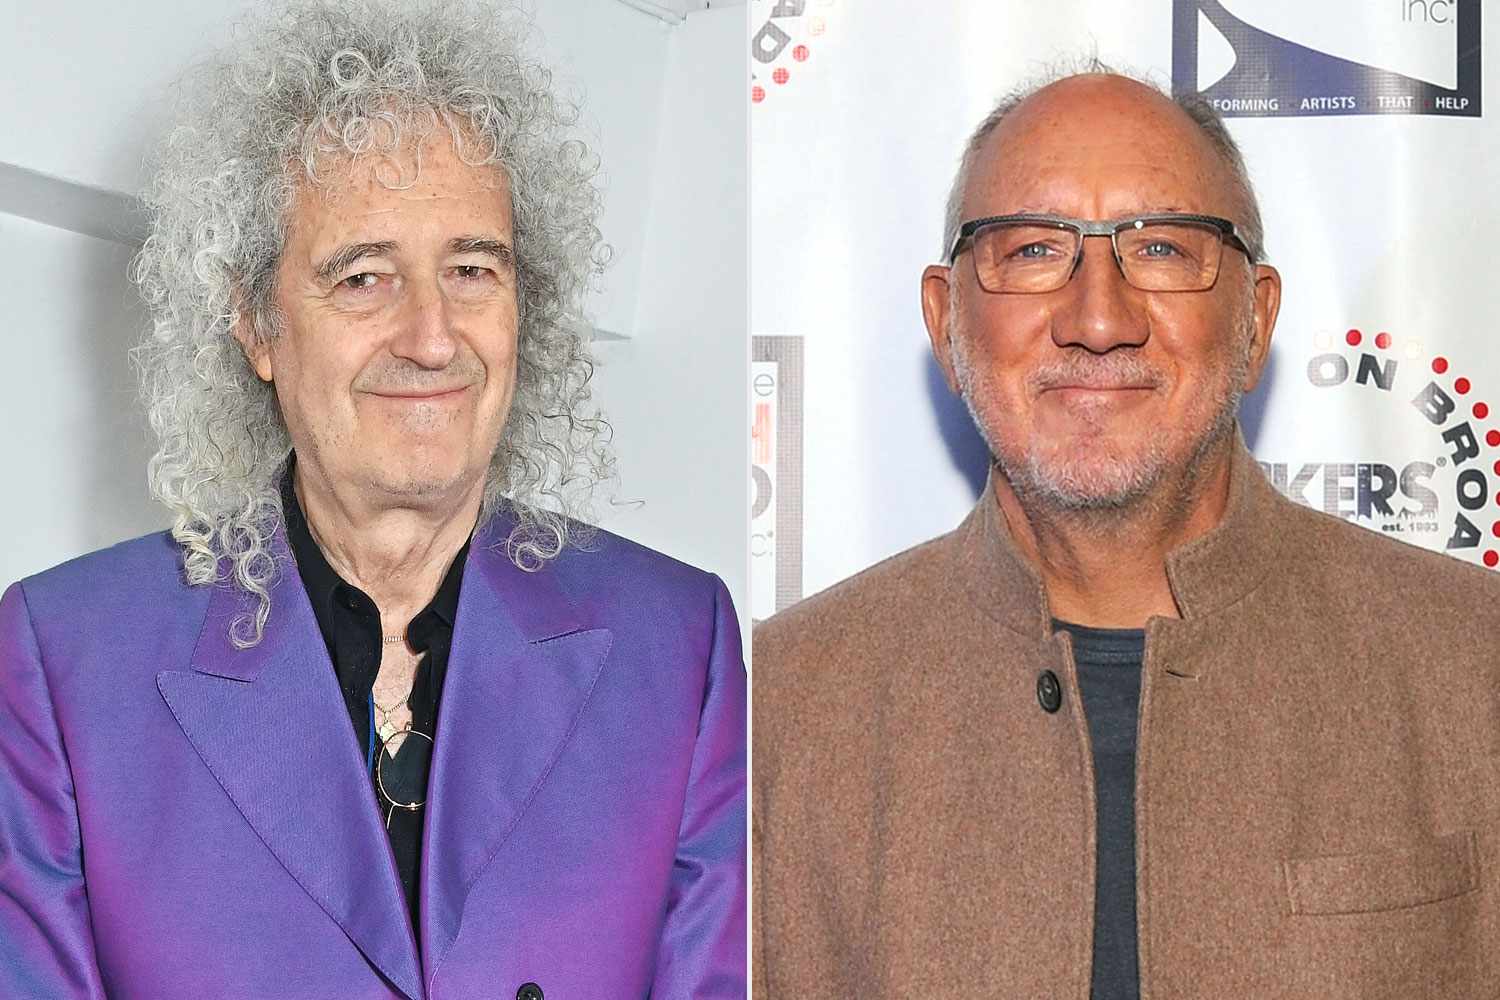 Queen's Brian May Says The Who's Pete Townshend 'Basically Invented' Rock Guitar: 'My Playing Owes So Much to Him'